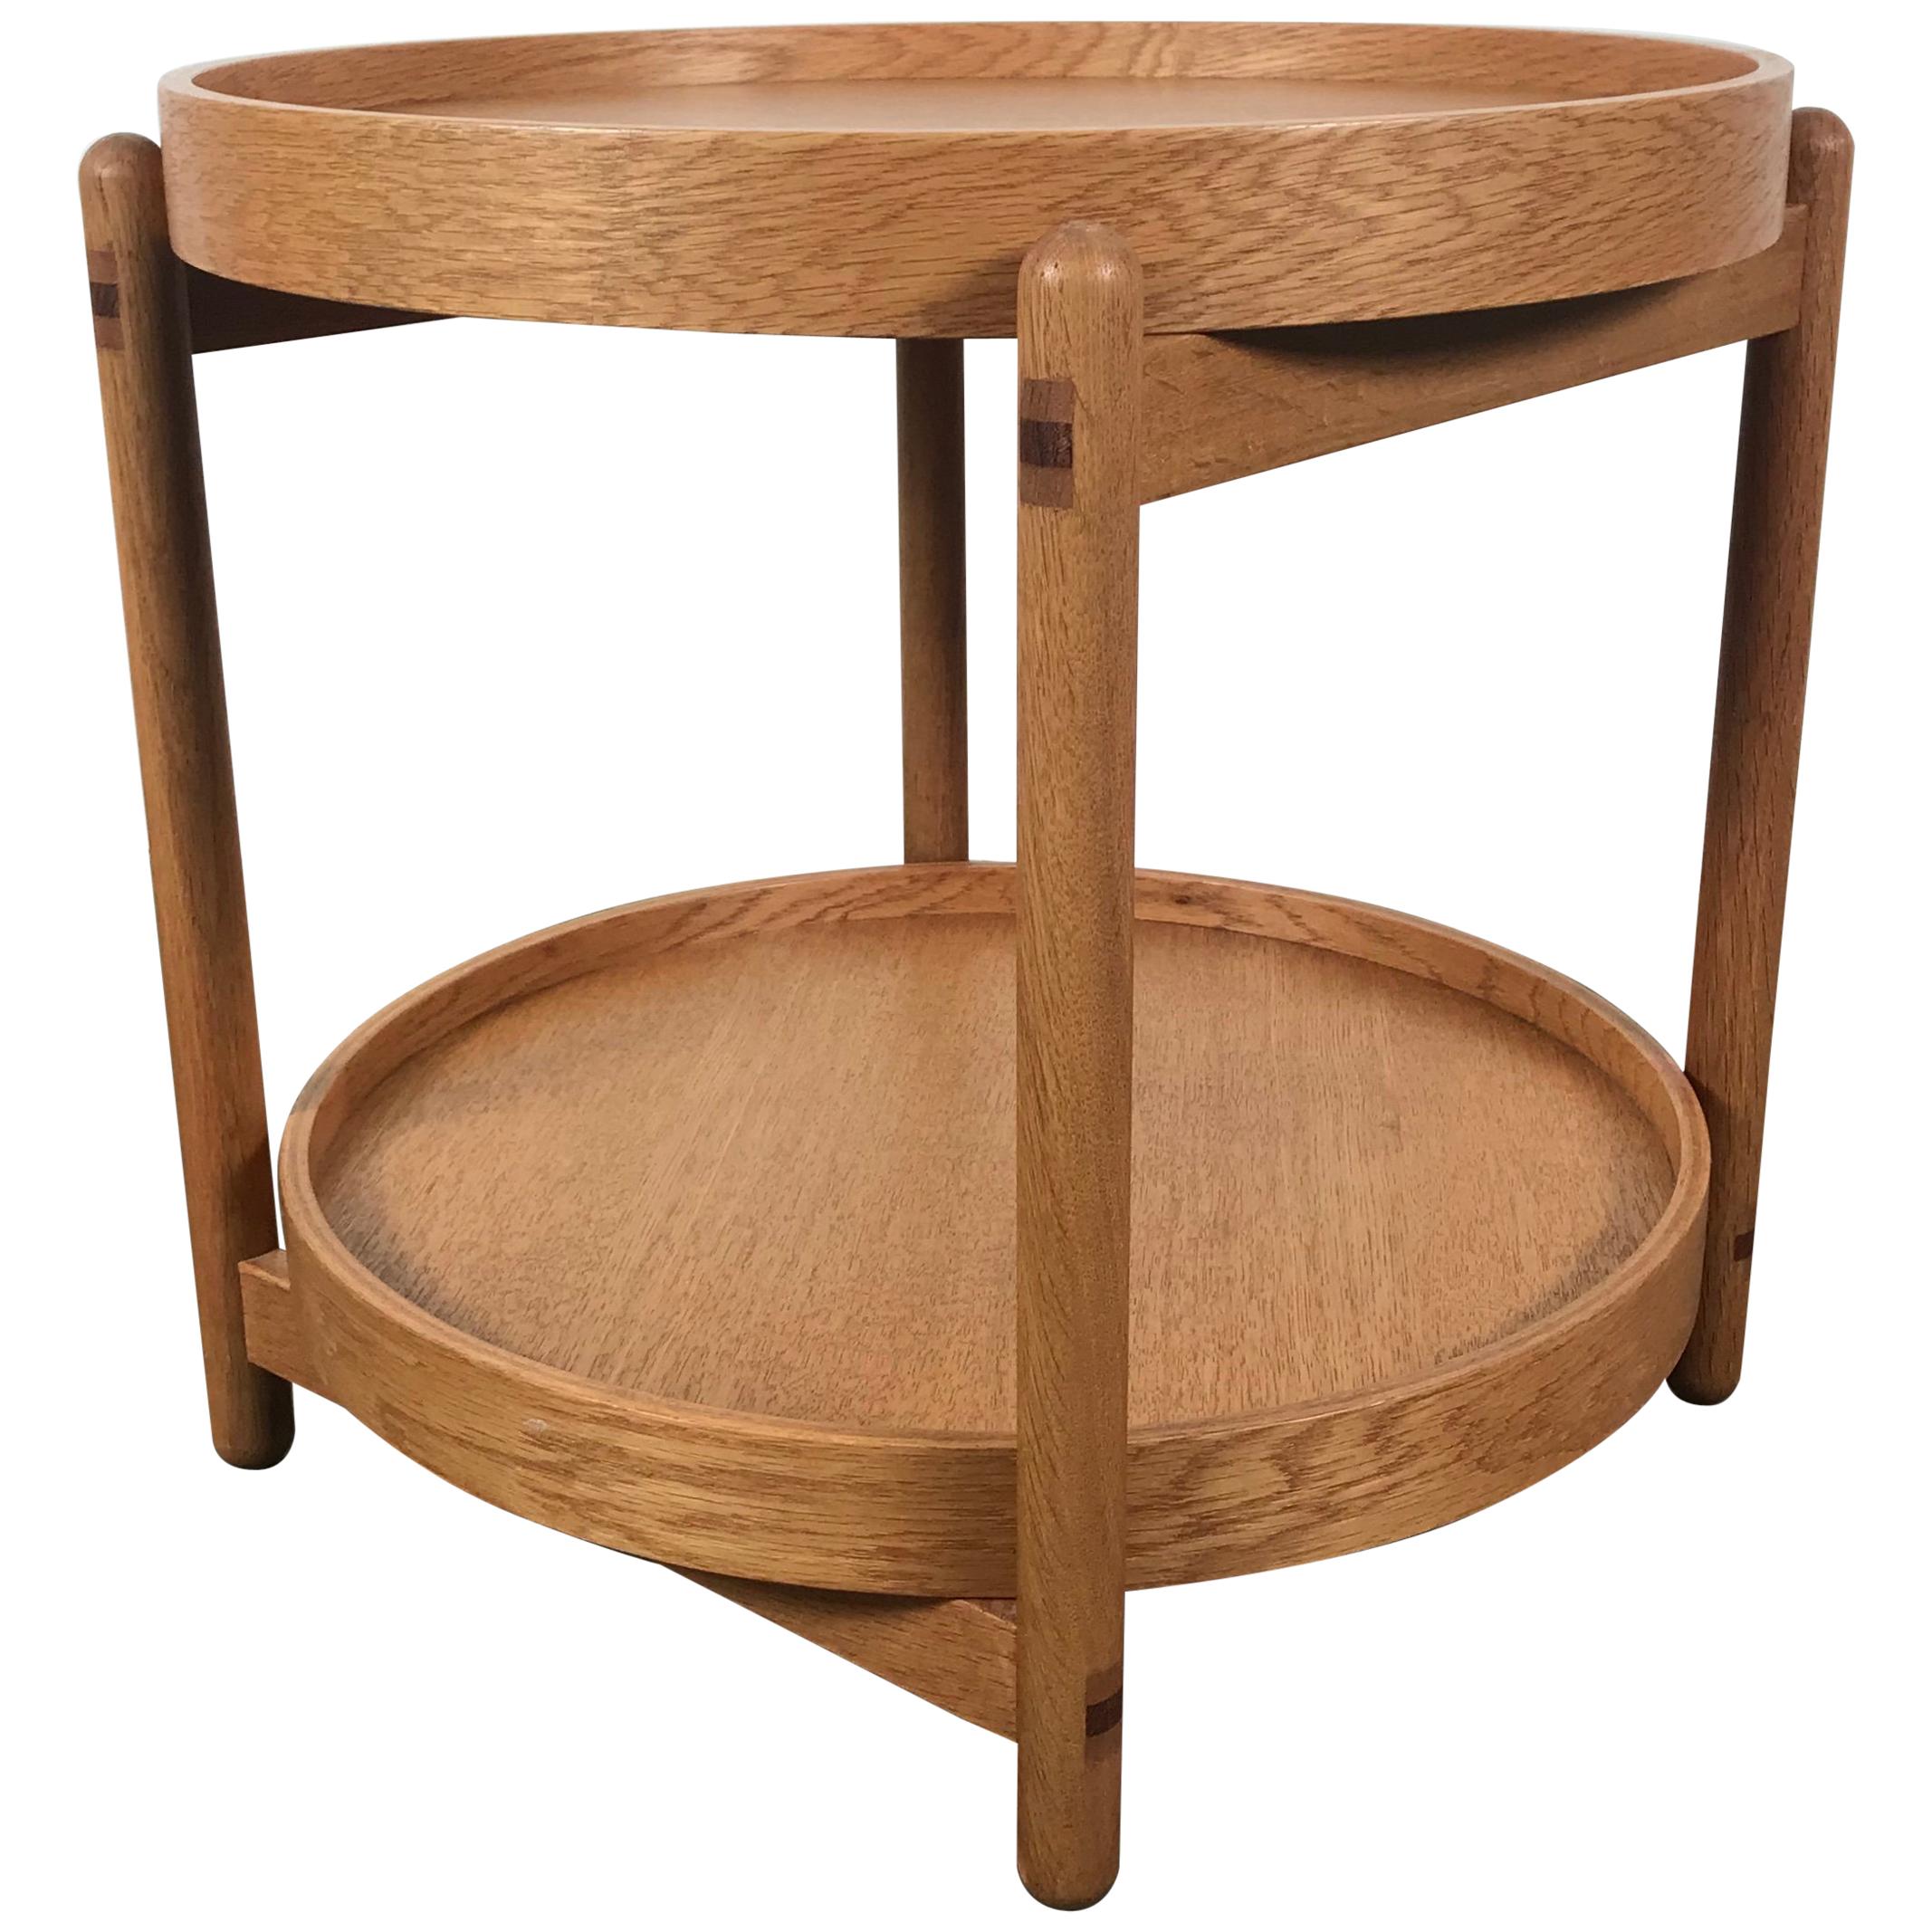 Teak Tray Table Made in Denmark Attributed to Hans Bolling, Torben Orskov